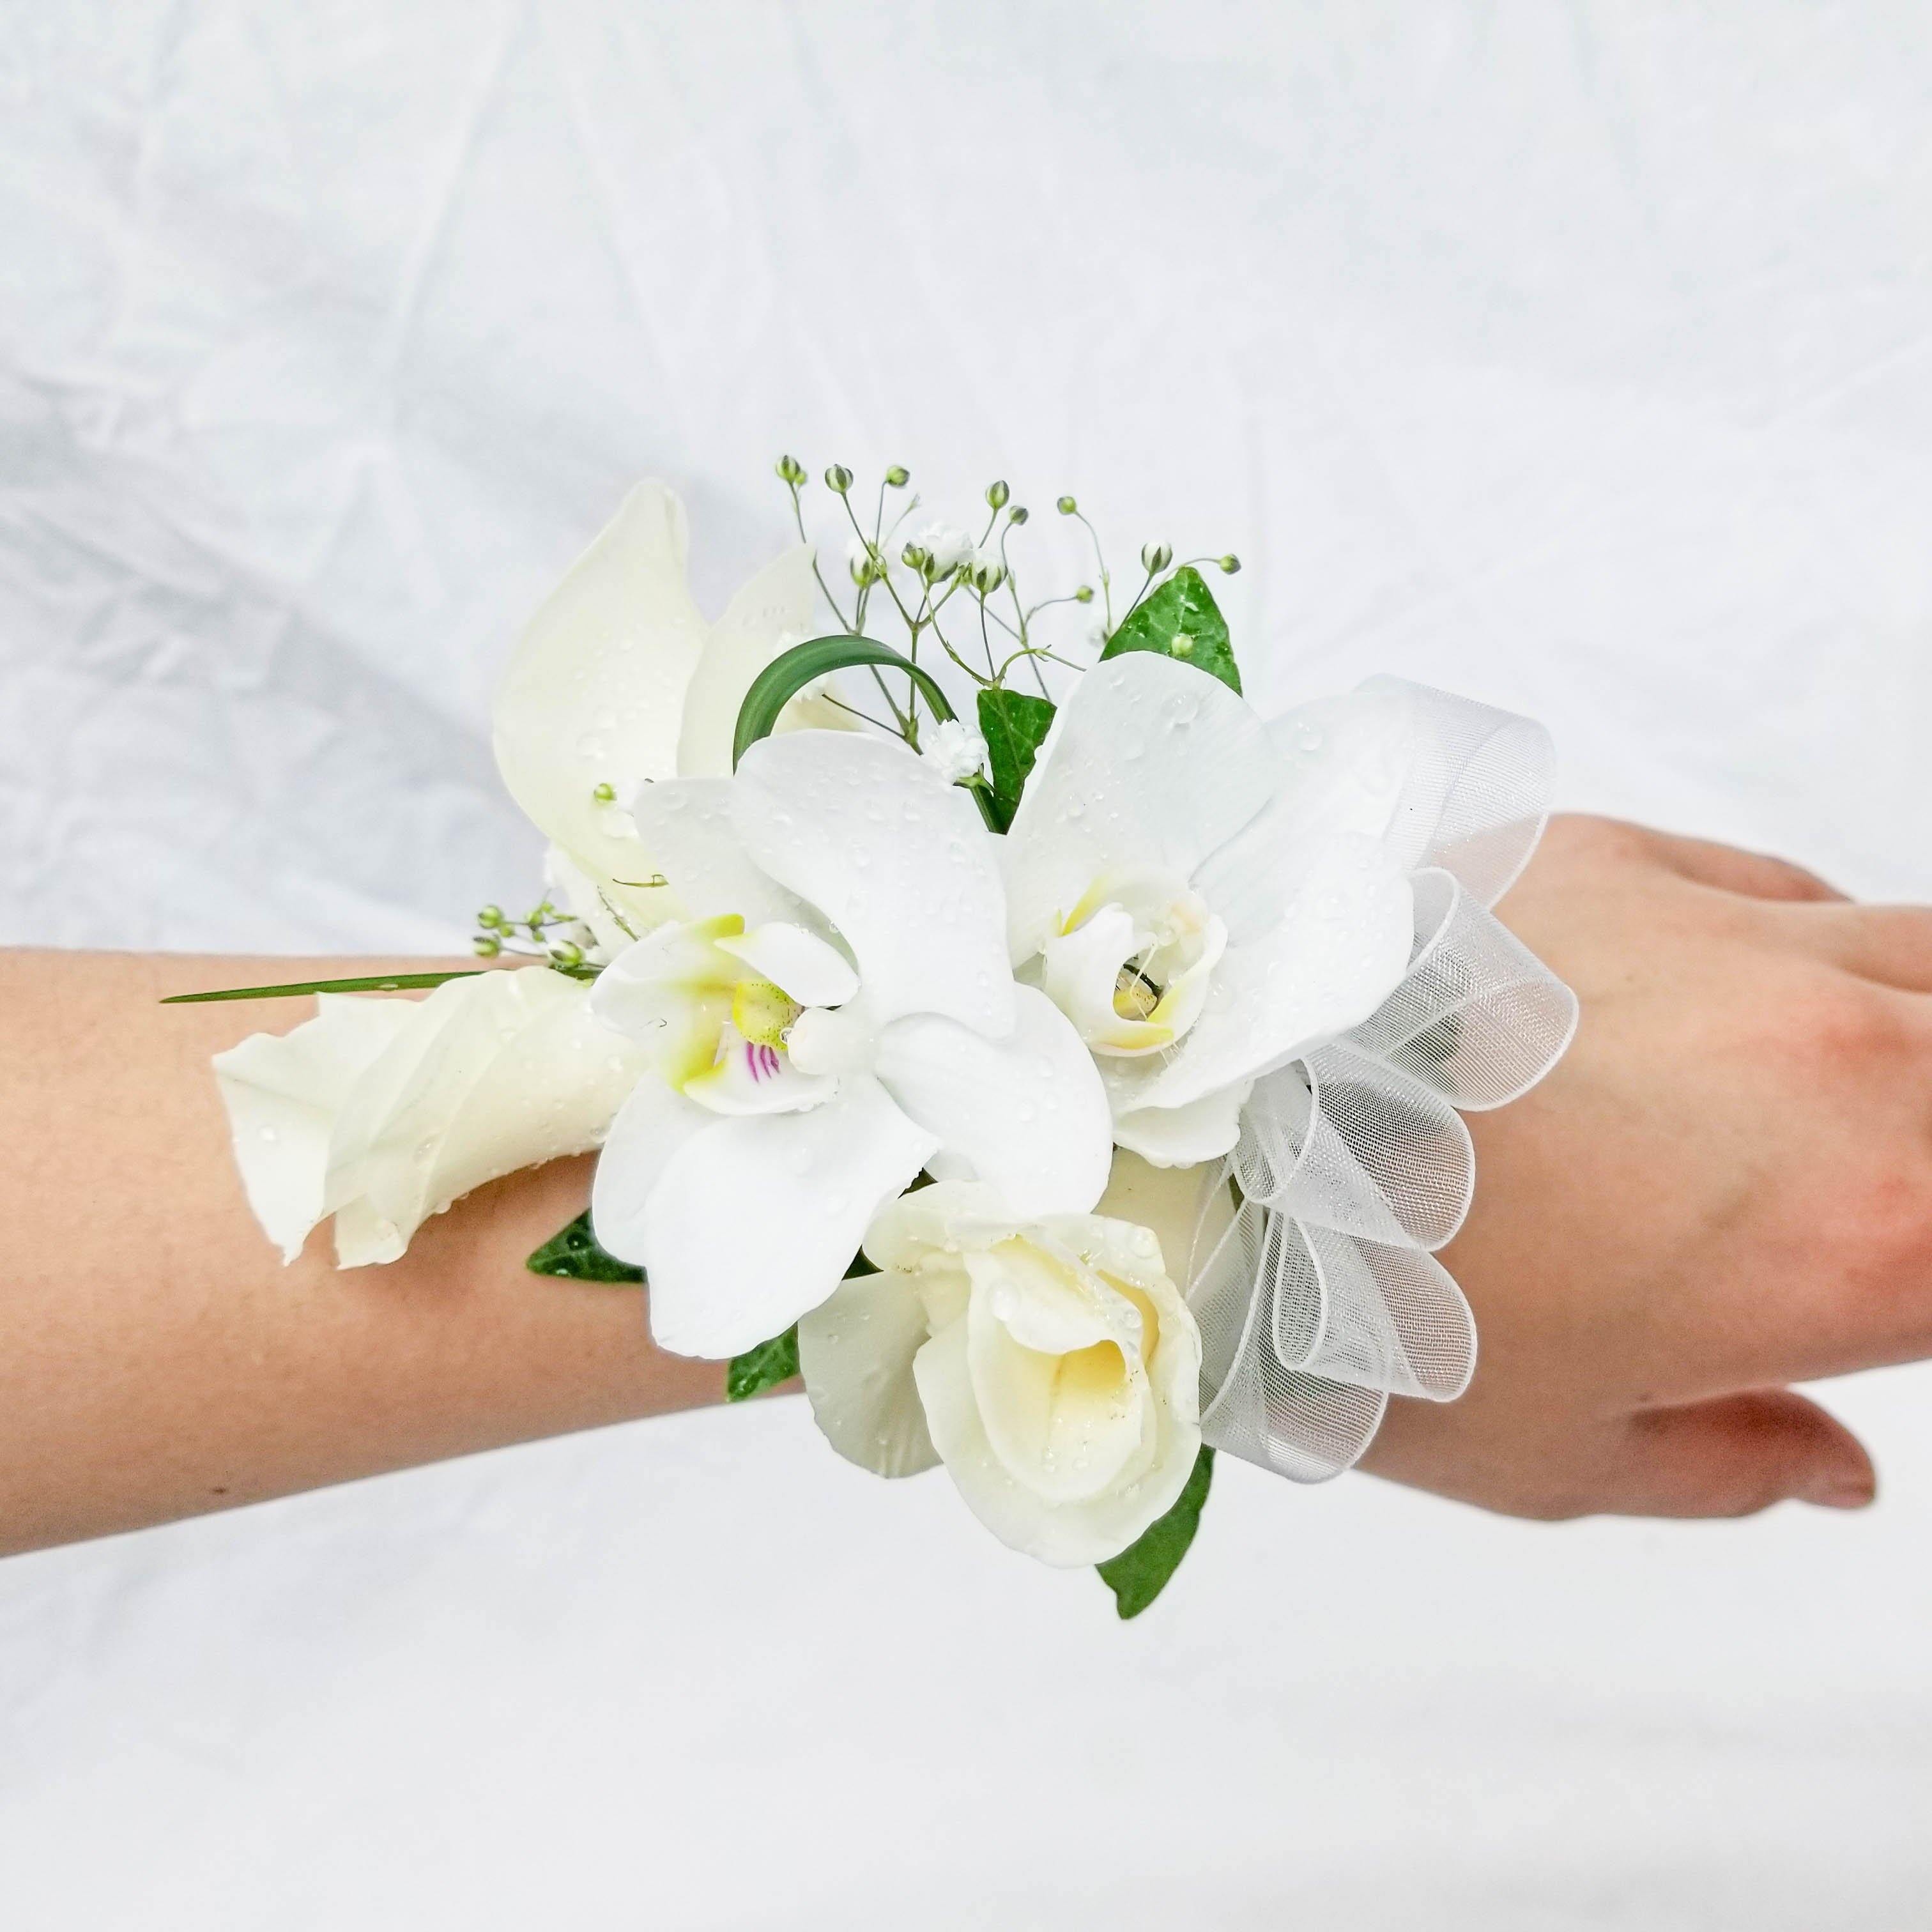 Orchid & Calla Lily Wrist Corsage - Toronto Flower Gallery